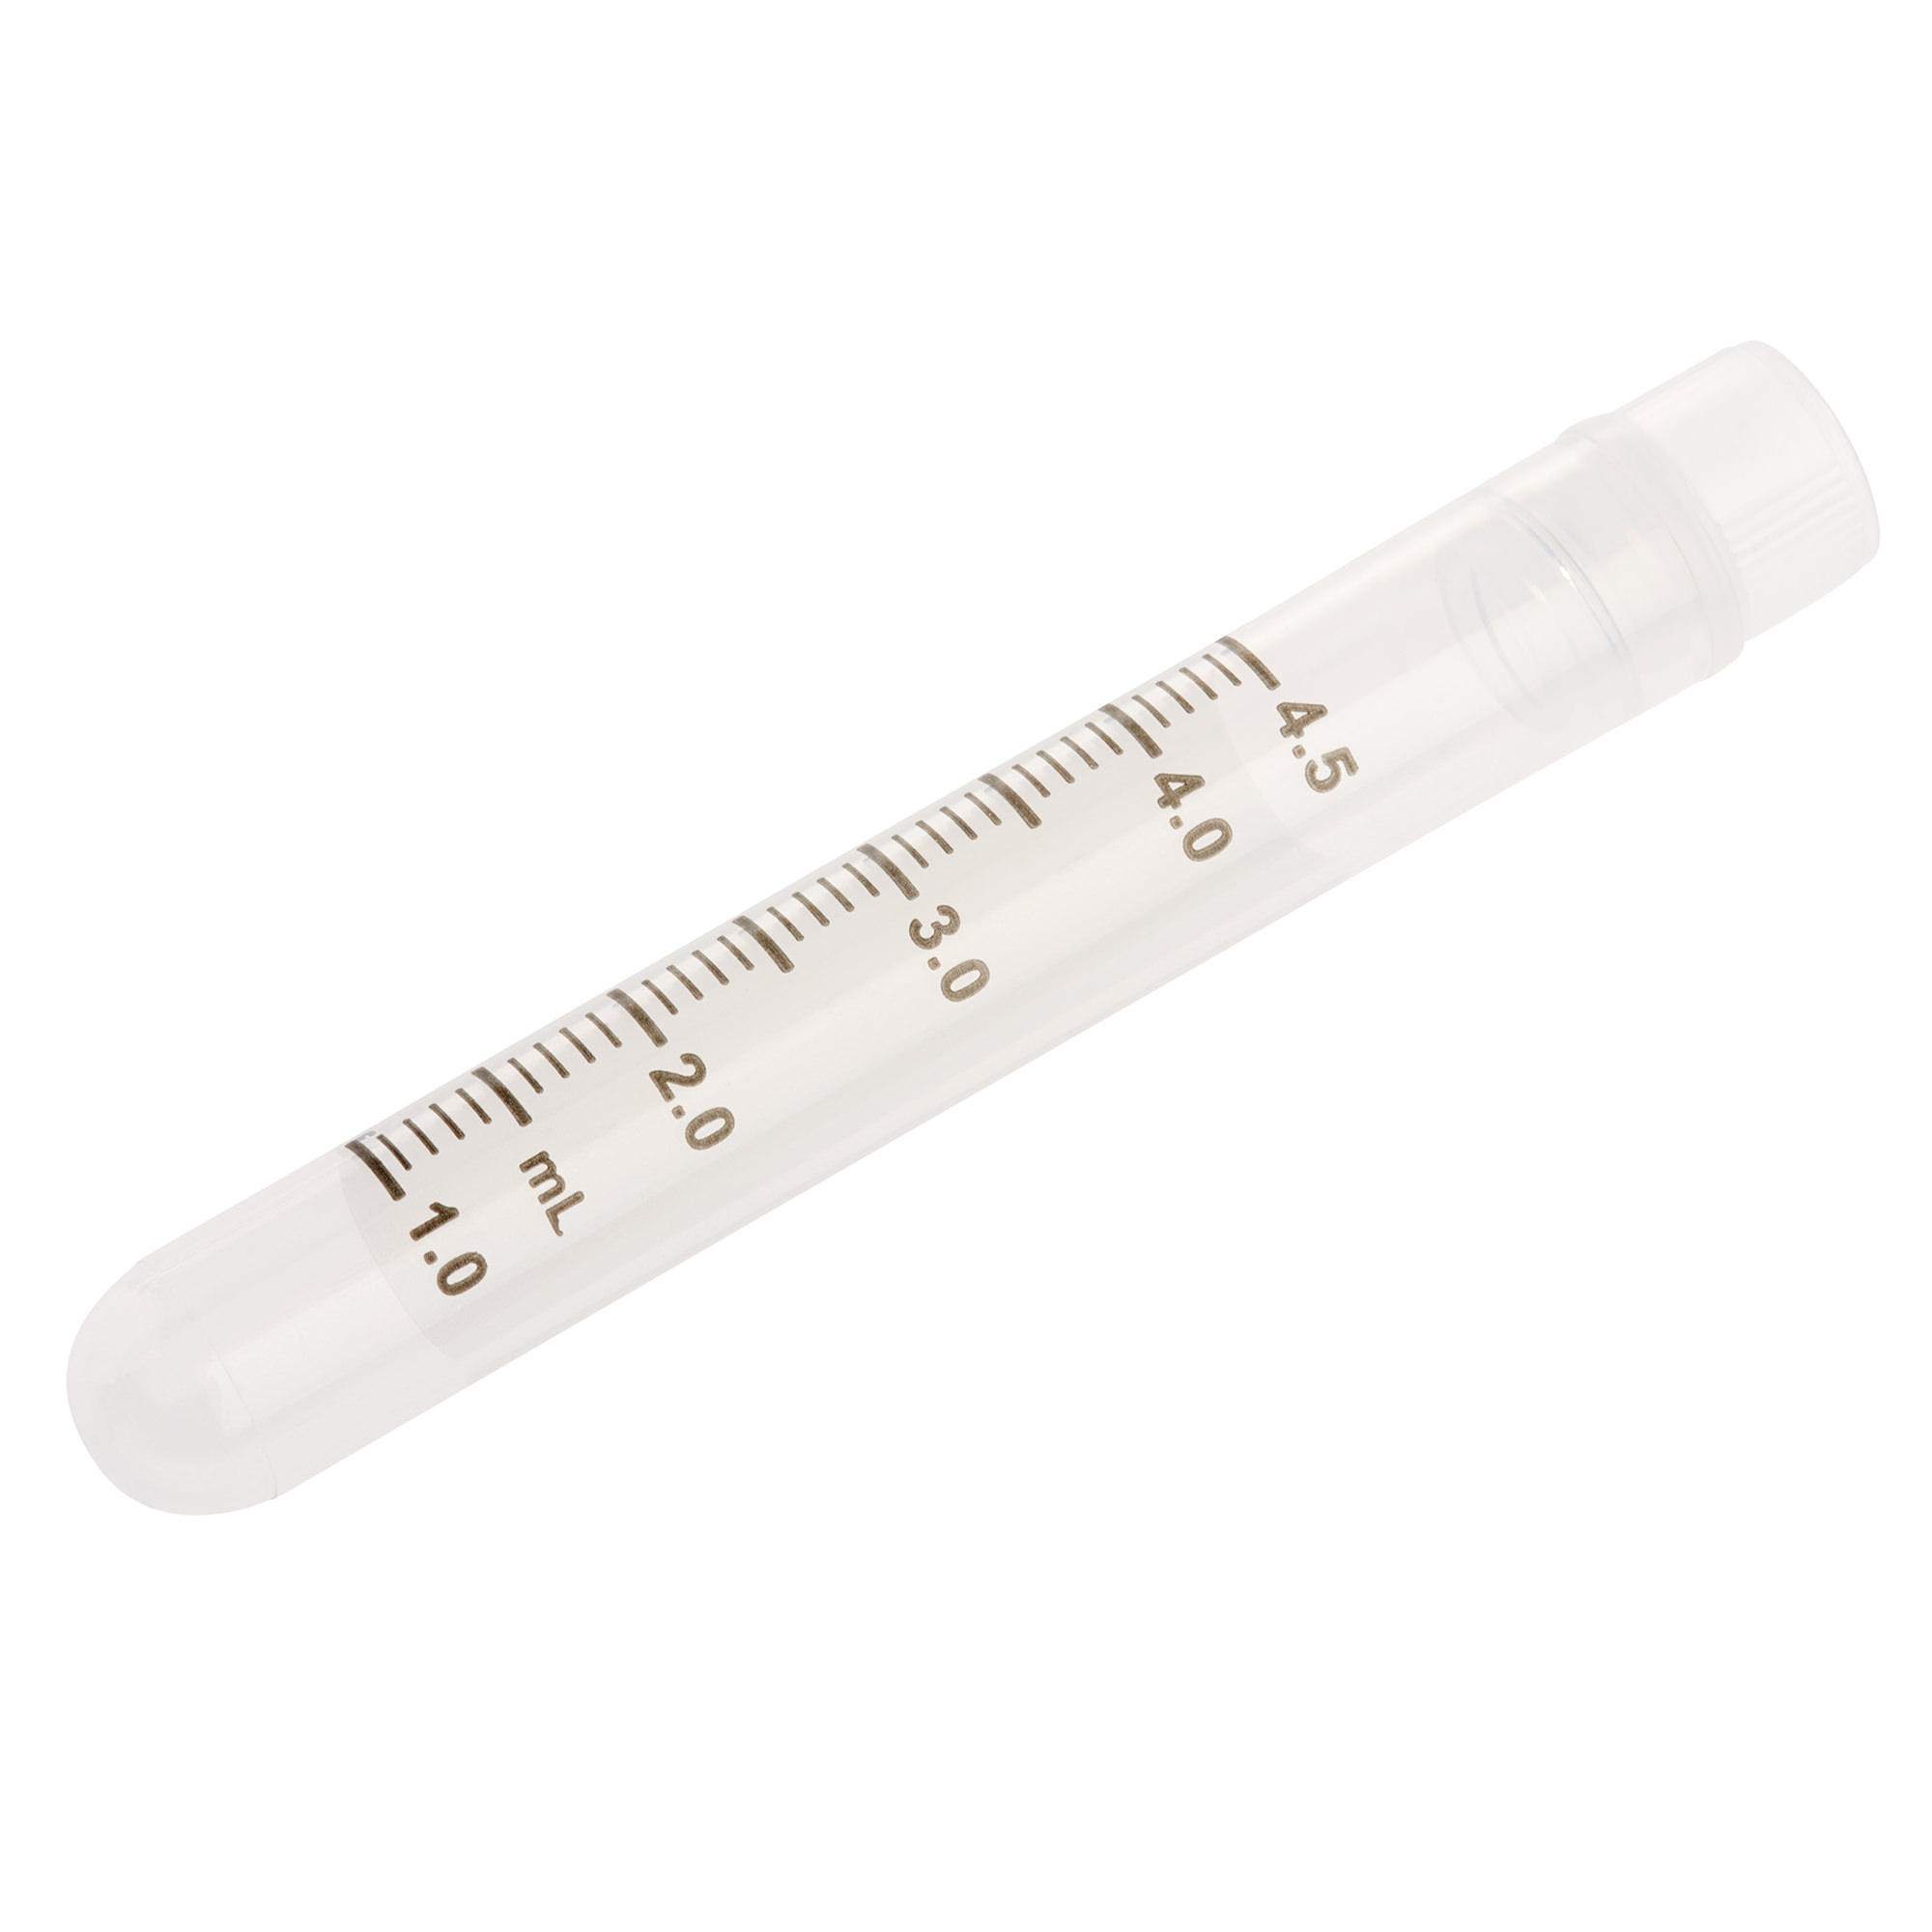 Cryogenic Vials and Accessories | 229918 • CELLTREAT Scientific Products